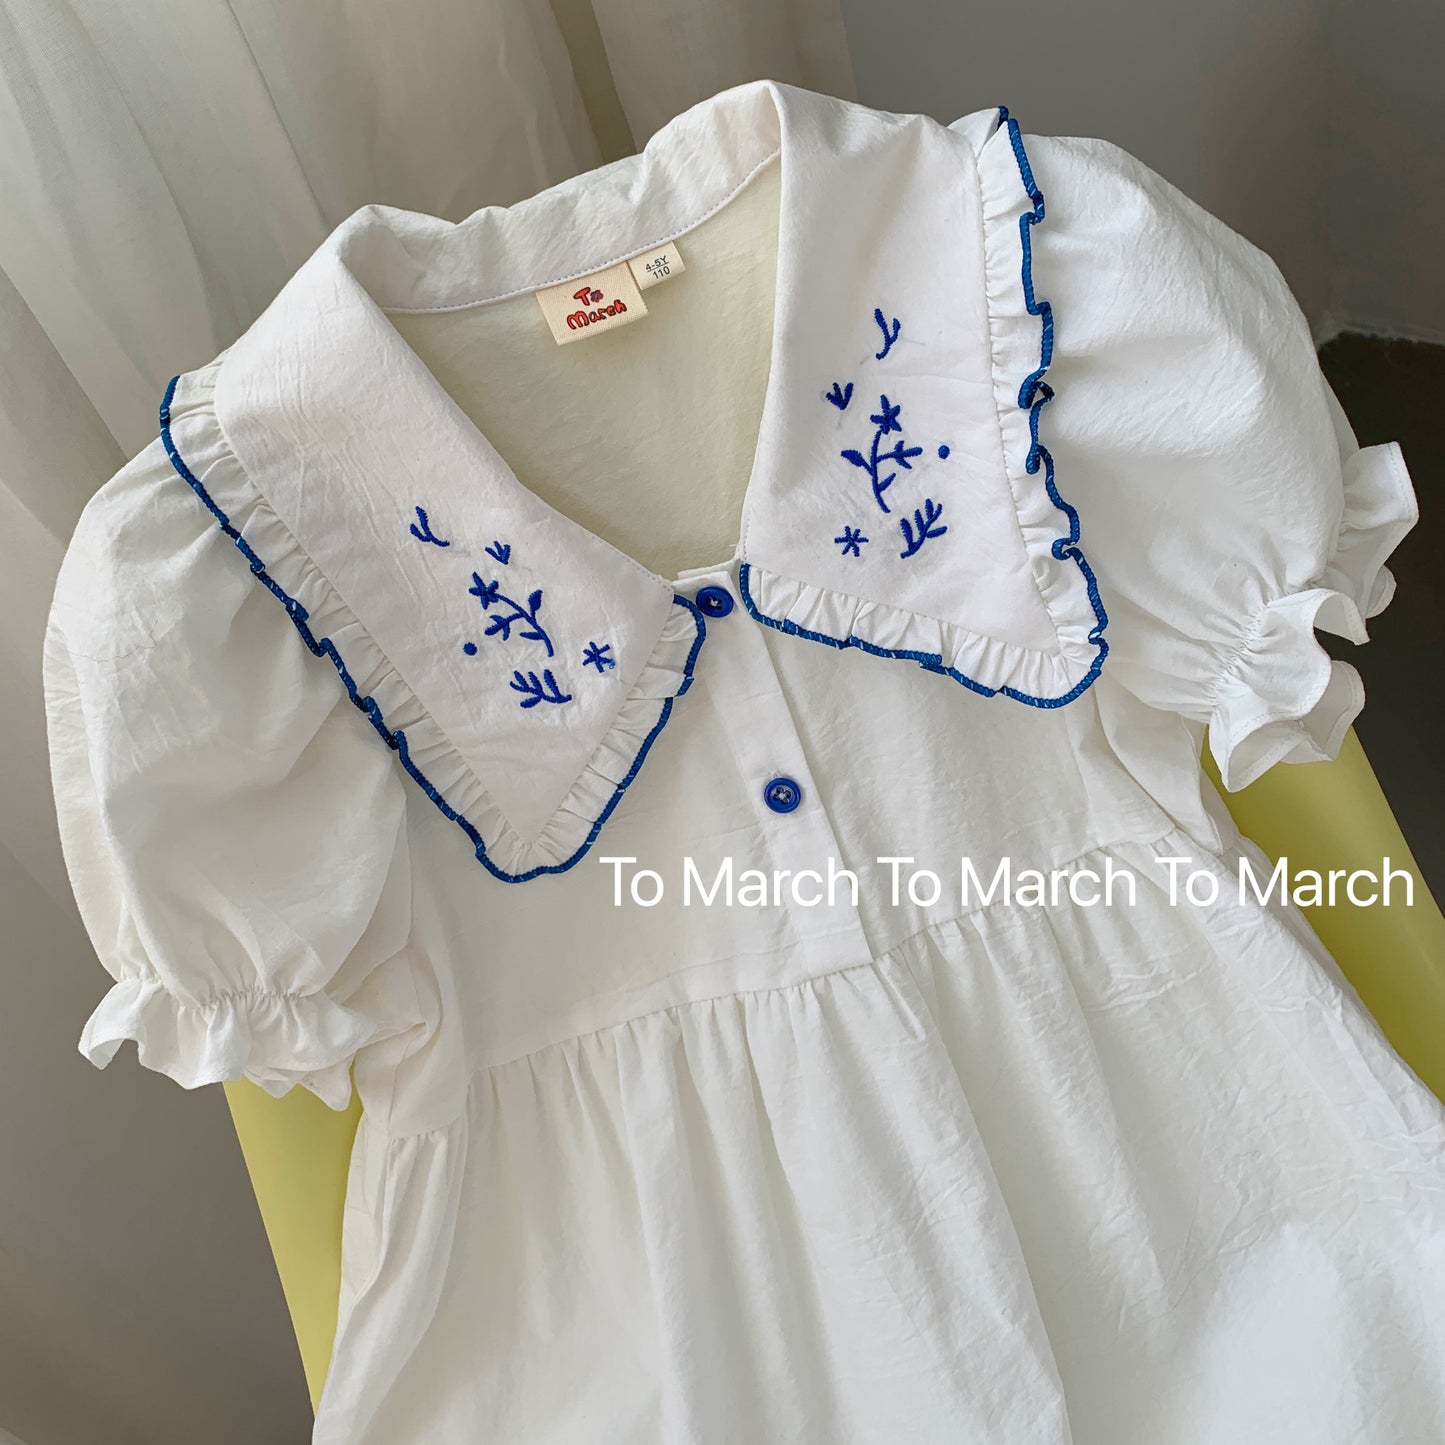 Embroidered Cotton Short Sleeve Dress